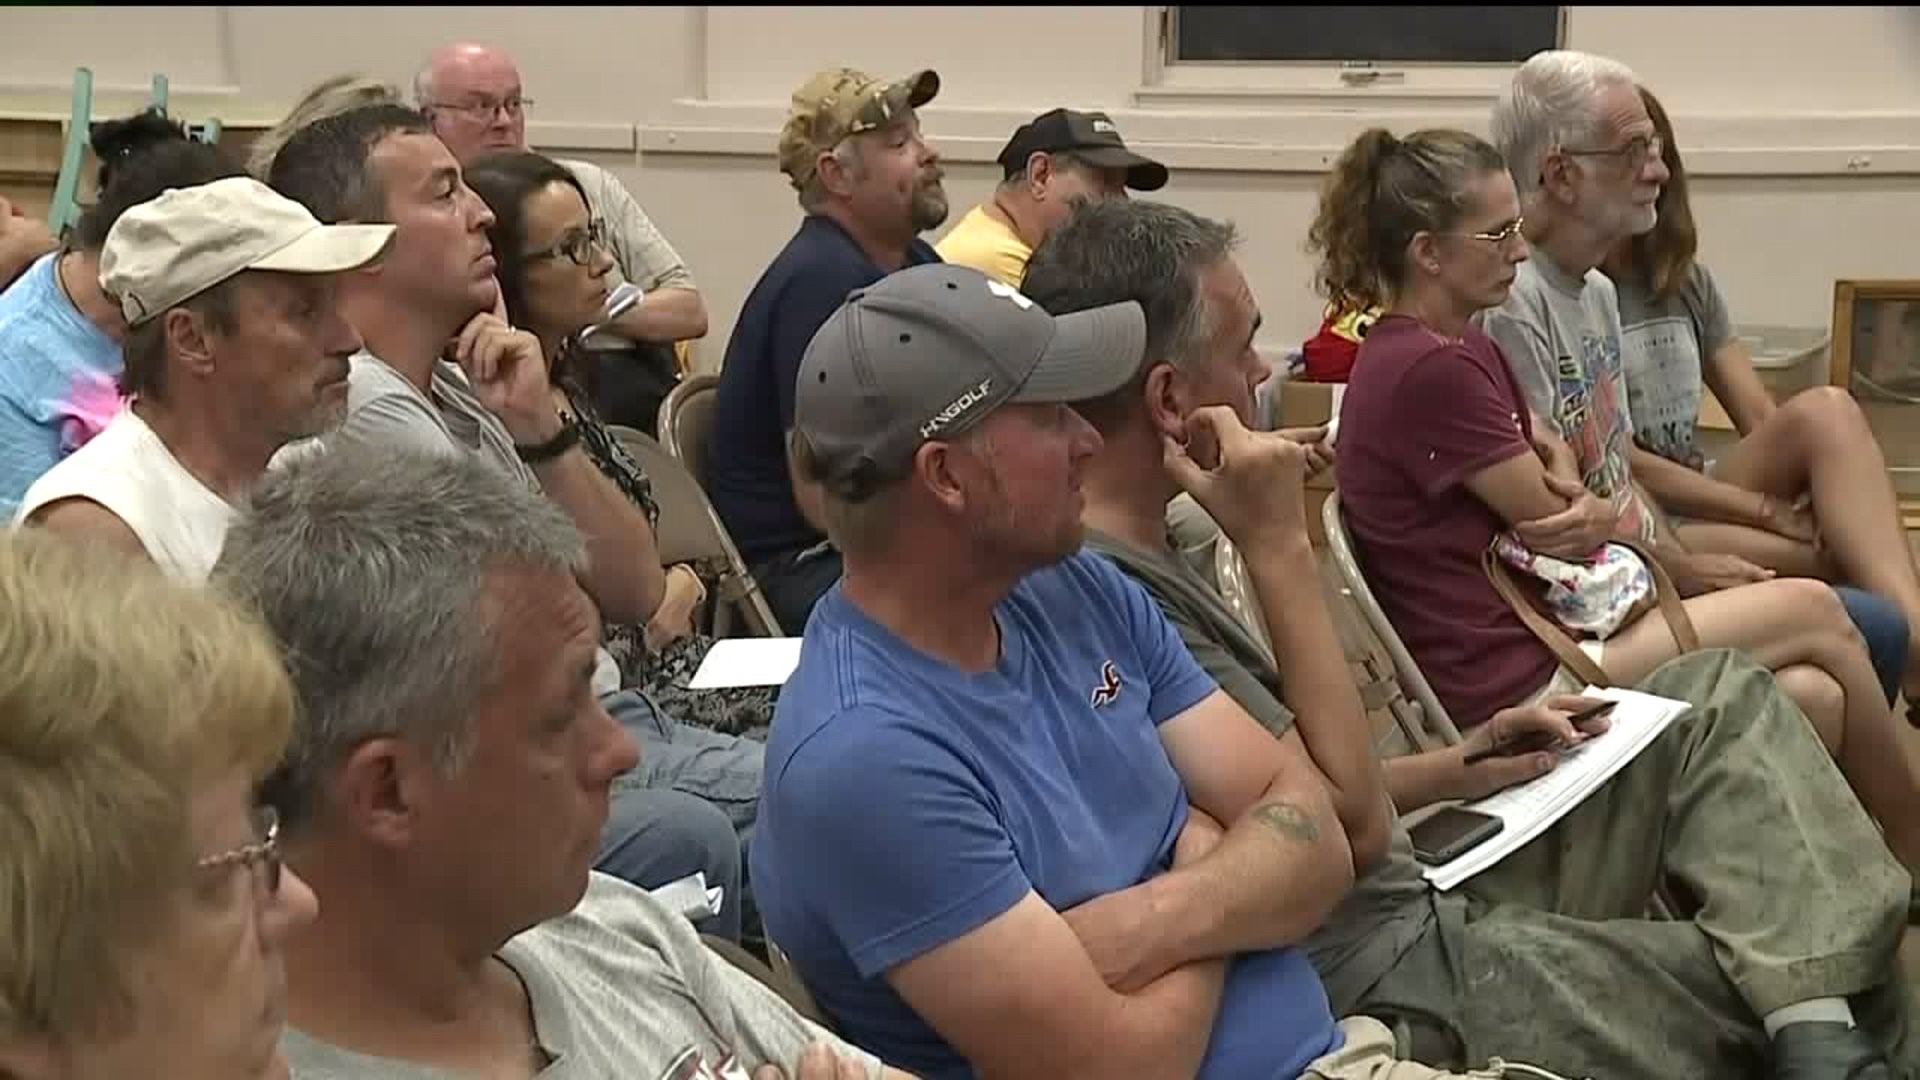 Tremont Residents Express Flooding Concerns at Borough Meeting